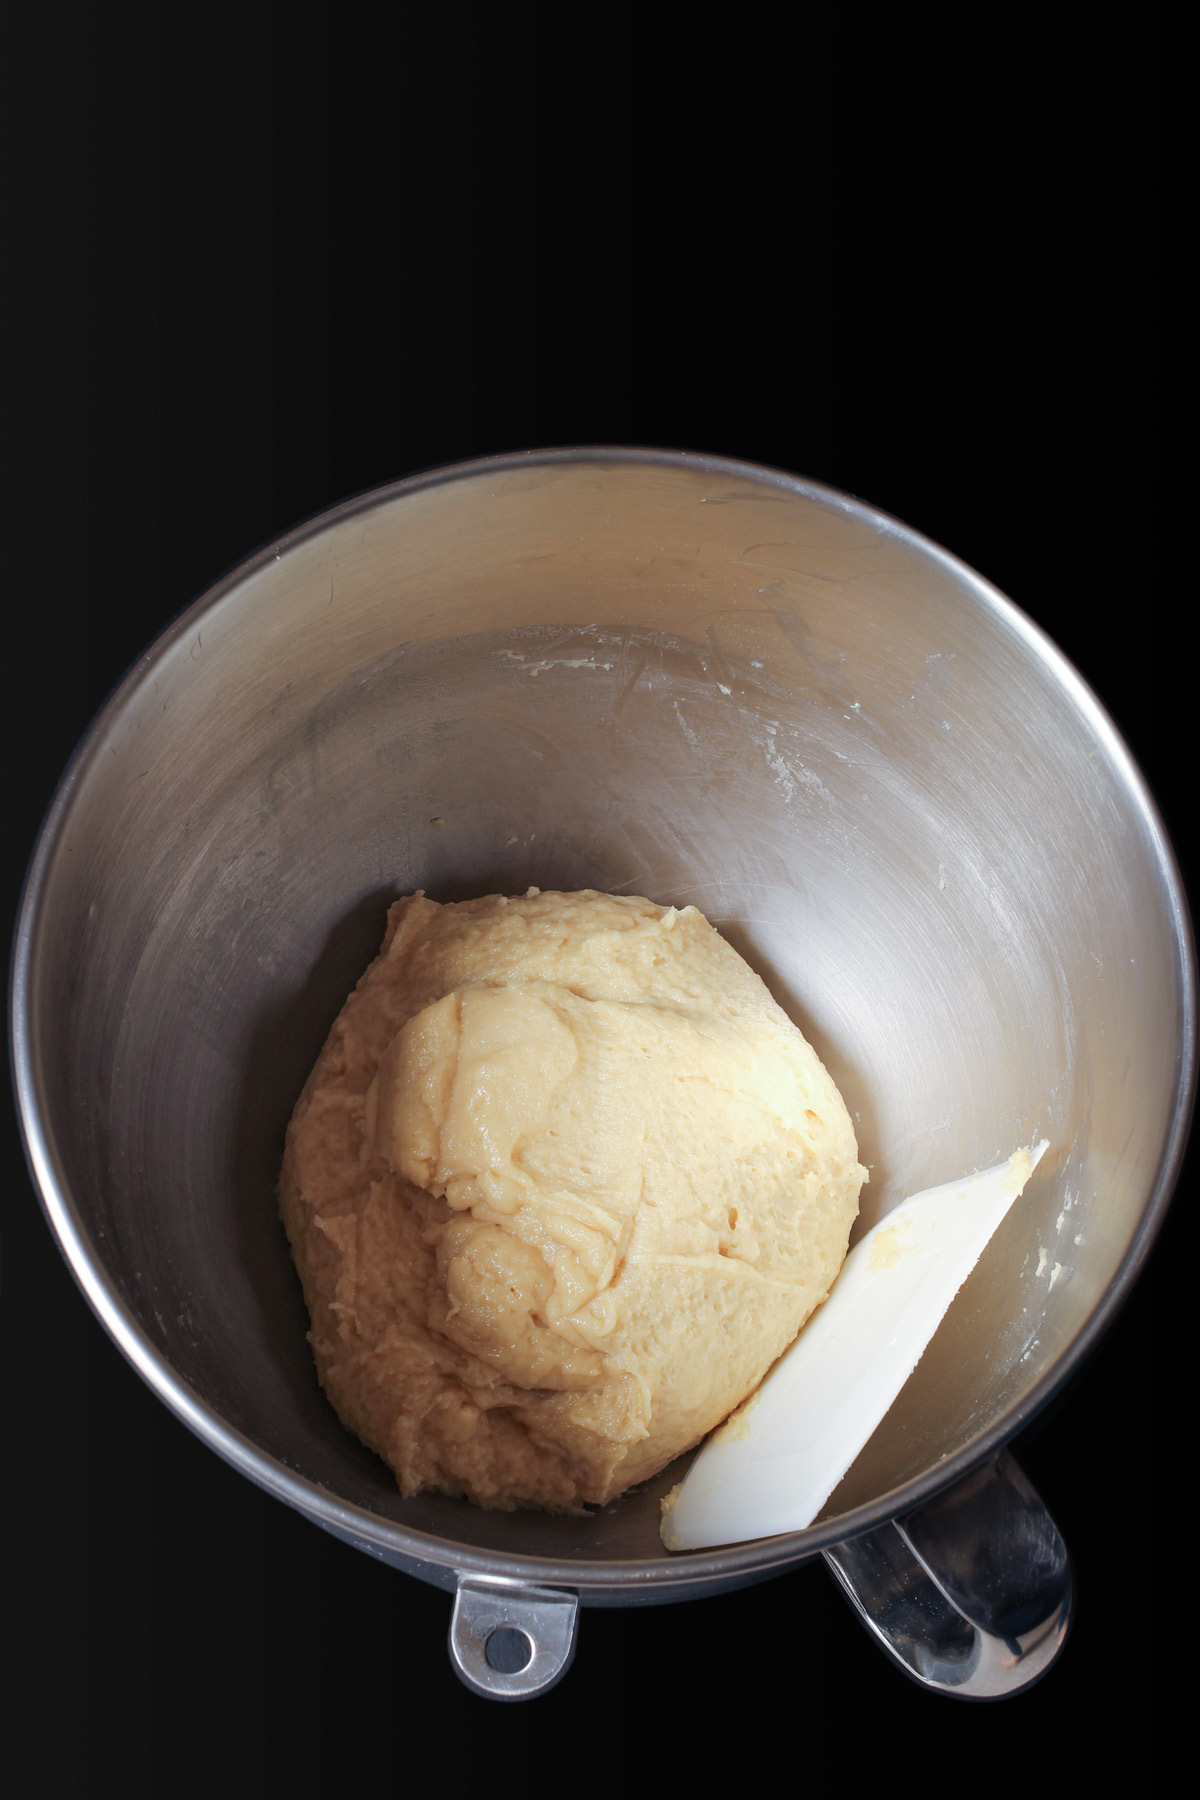 scraping the sides of the bowl around the dough ball to make a firm ball.